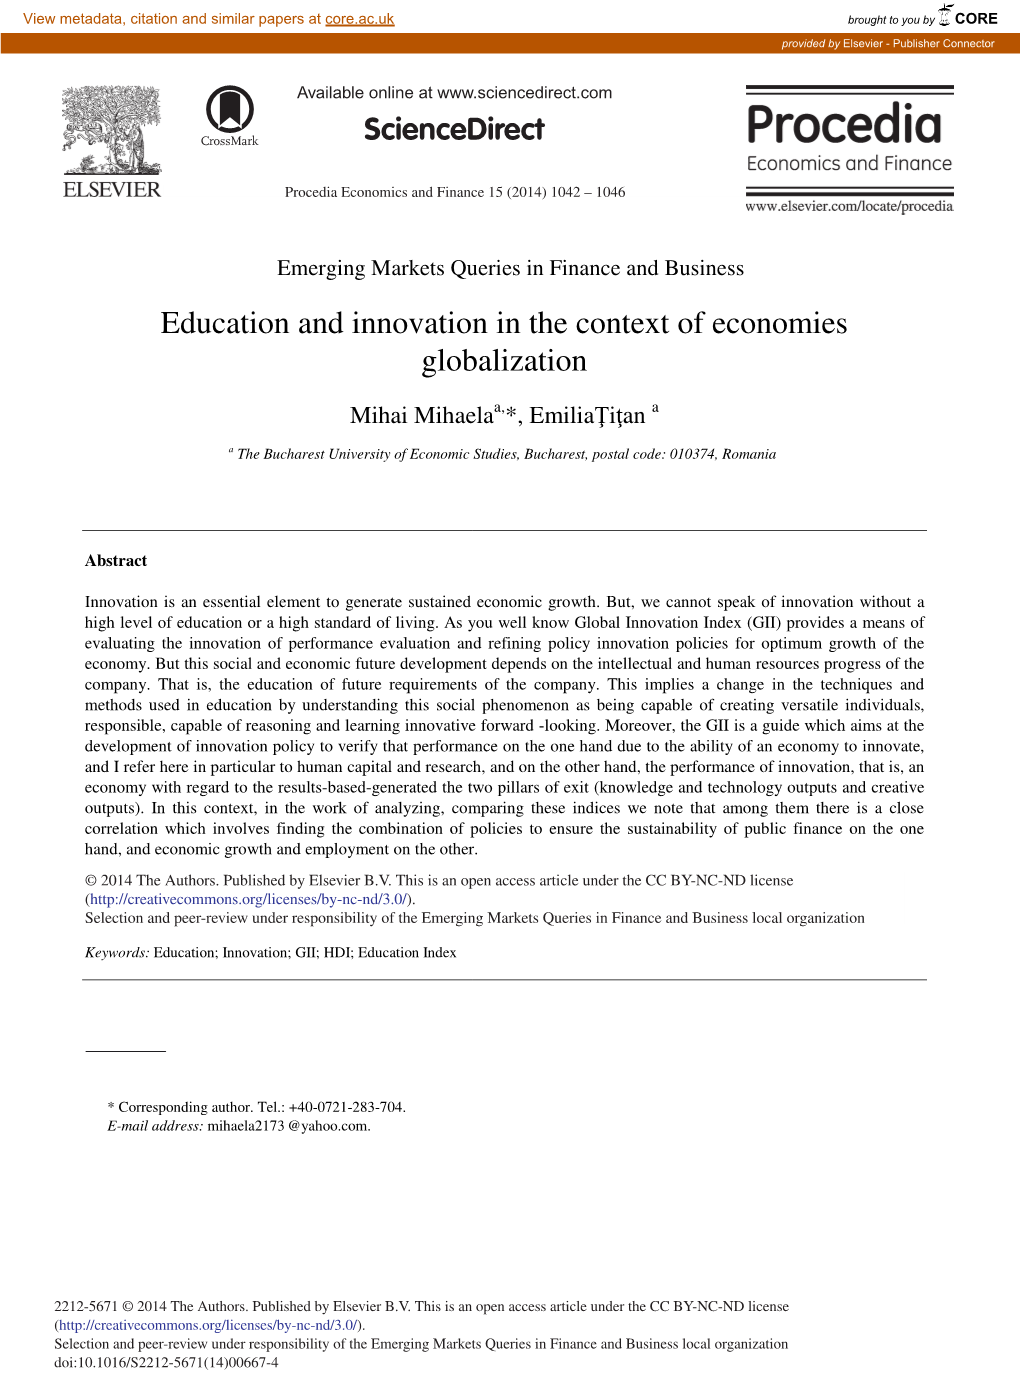 Education and Innovation in the Context of Economies Globalization